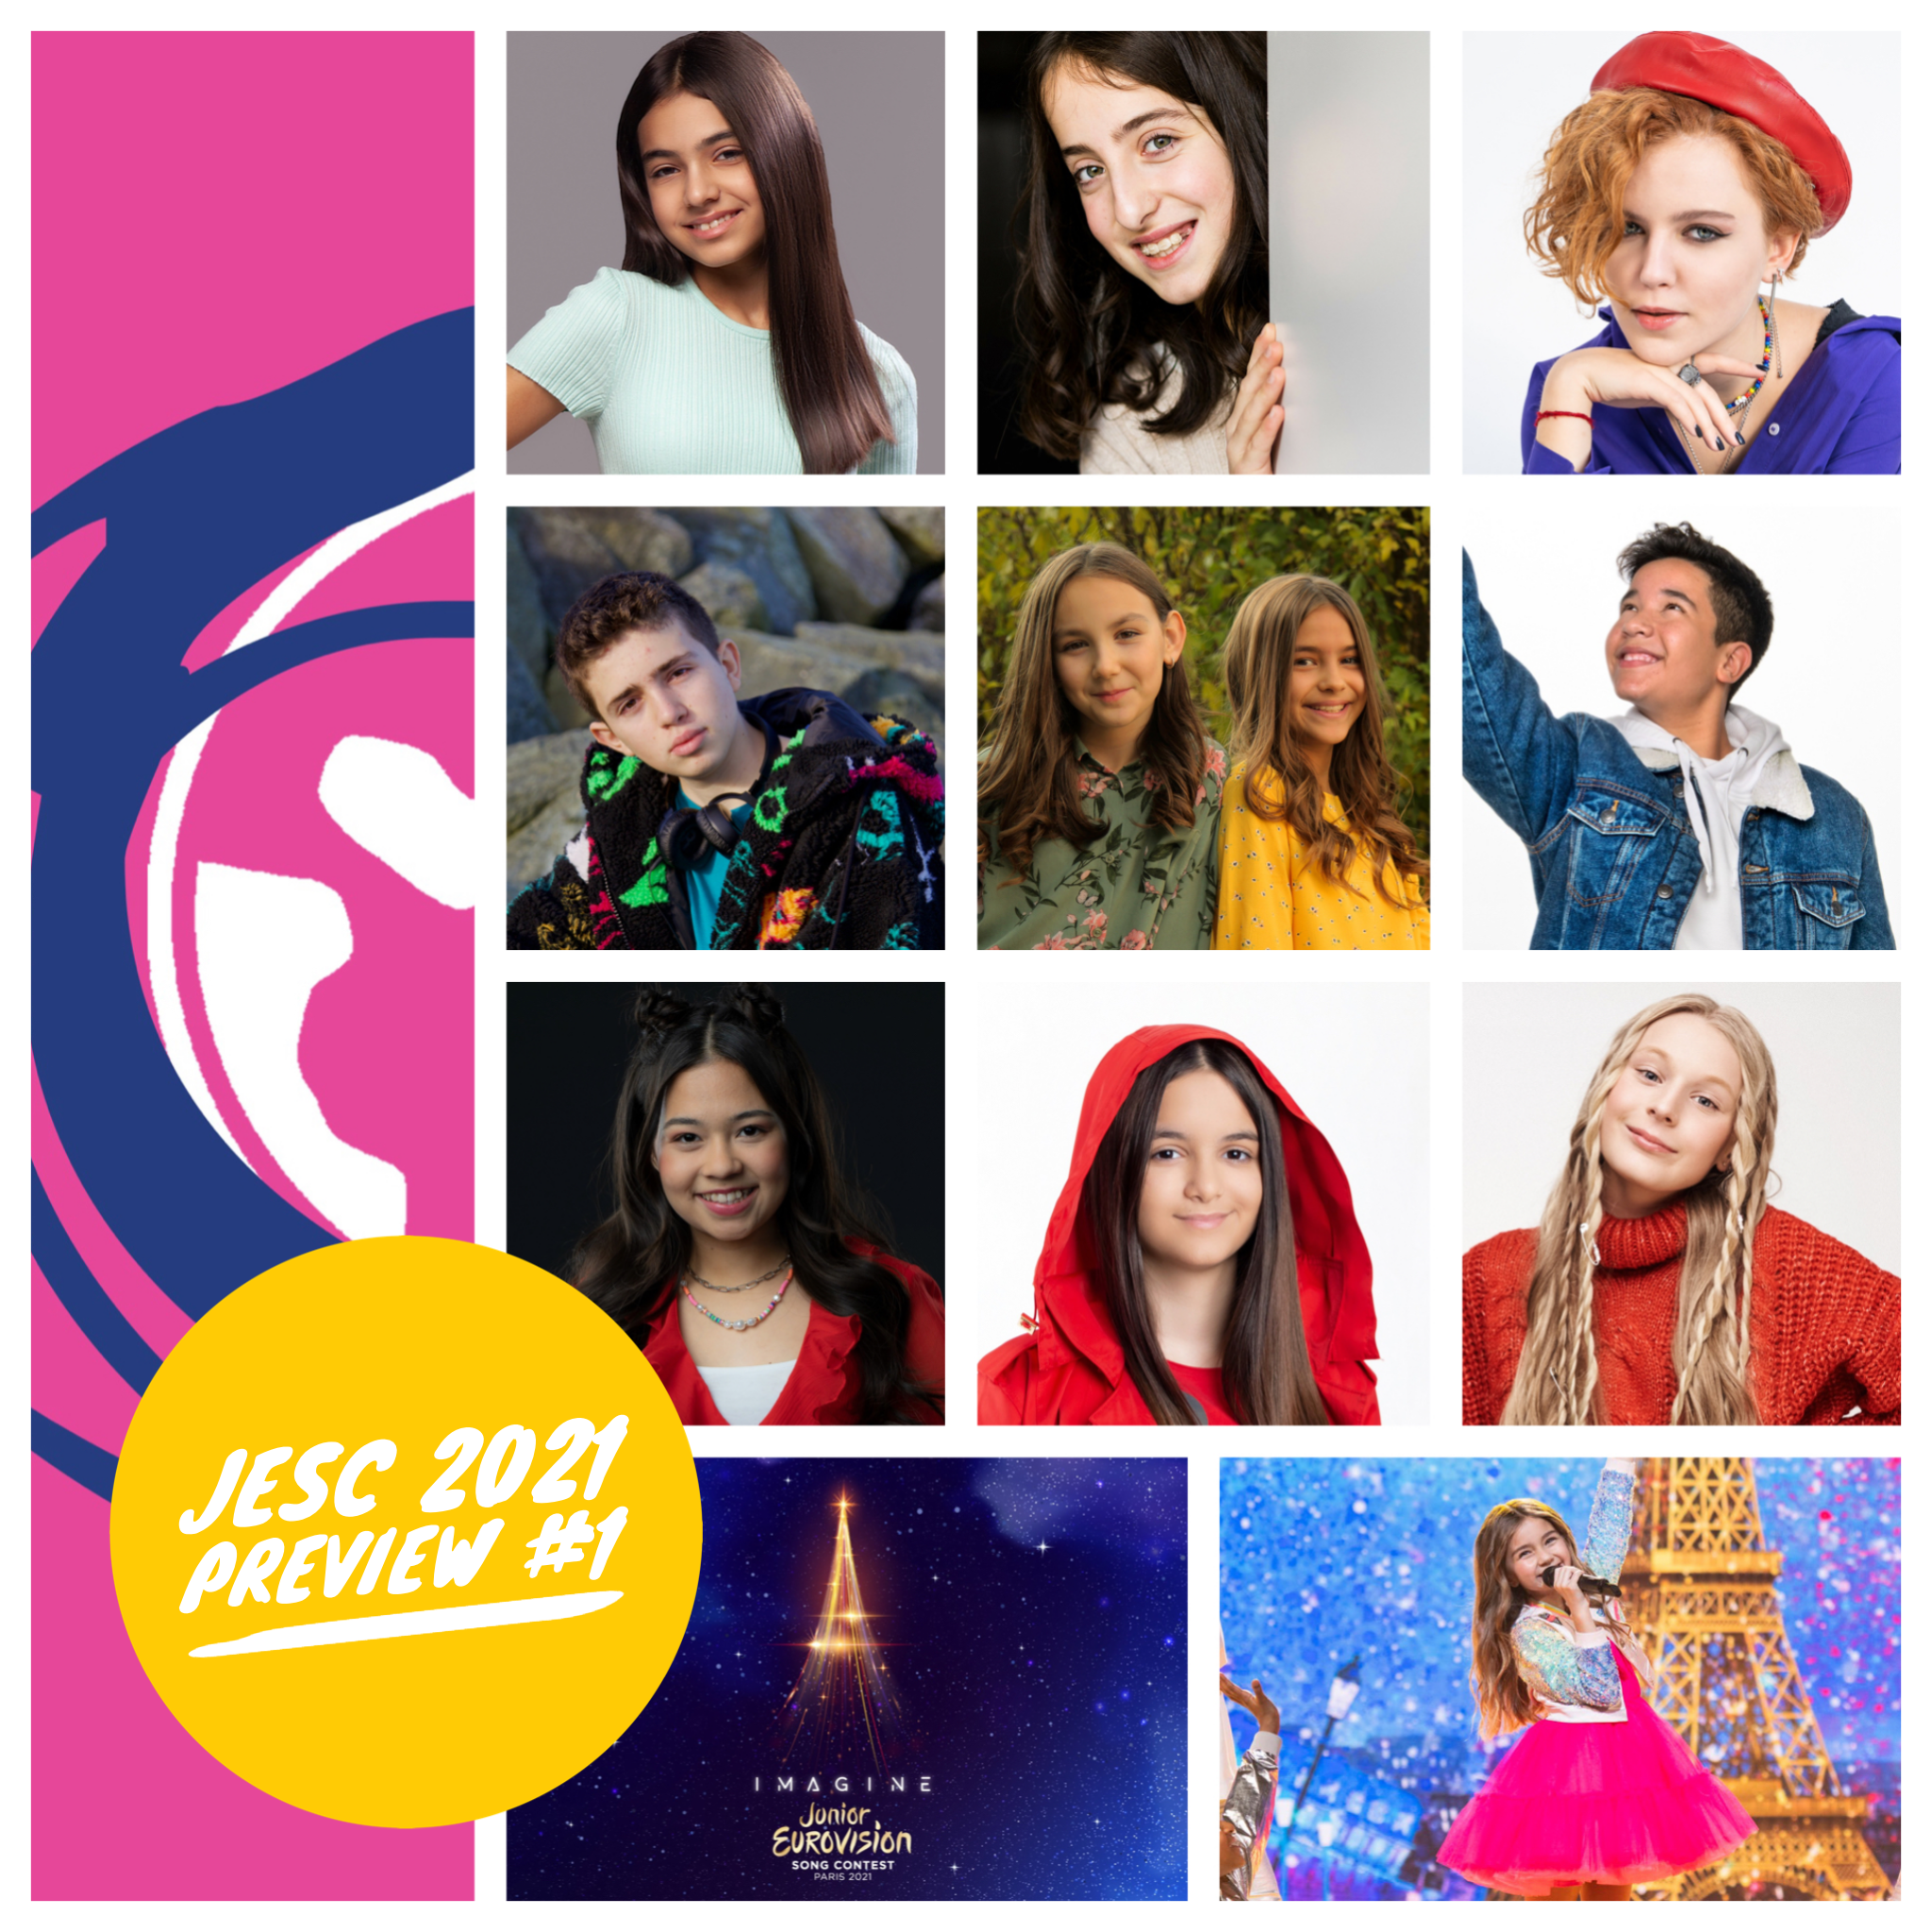 Two hundred and seventy-eight – Junior Eurovision Song Contest 2021 Preview #1